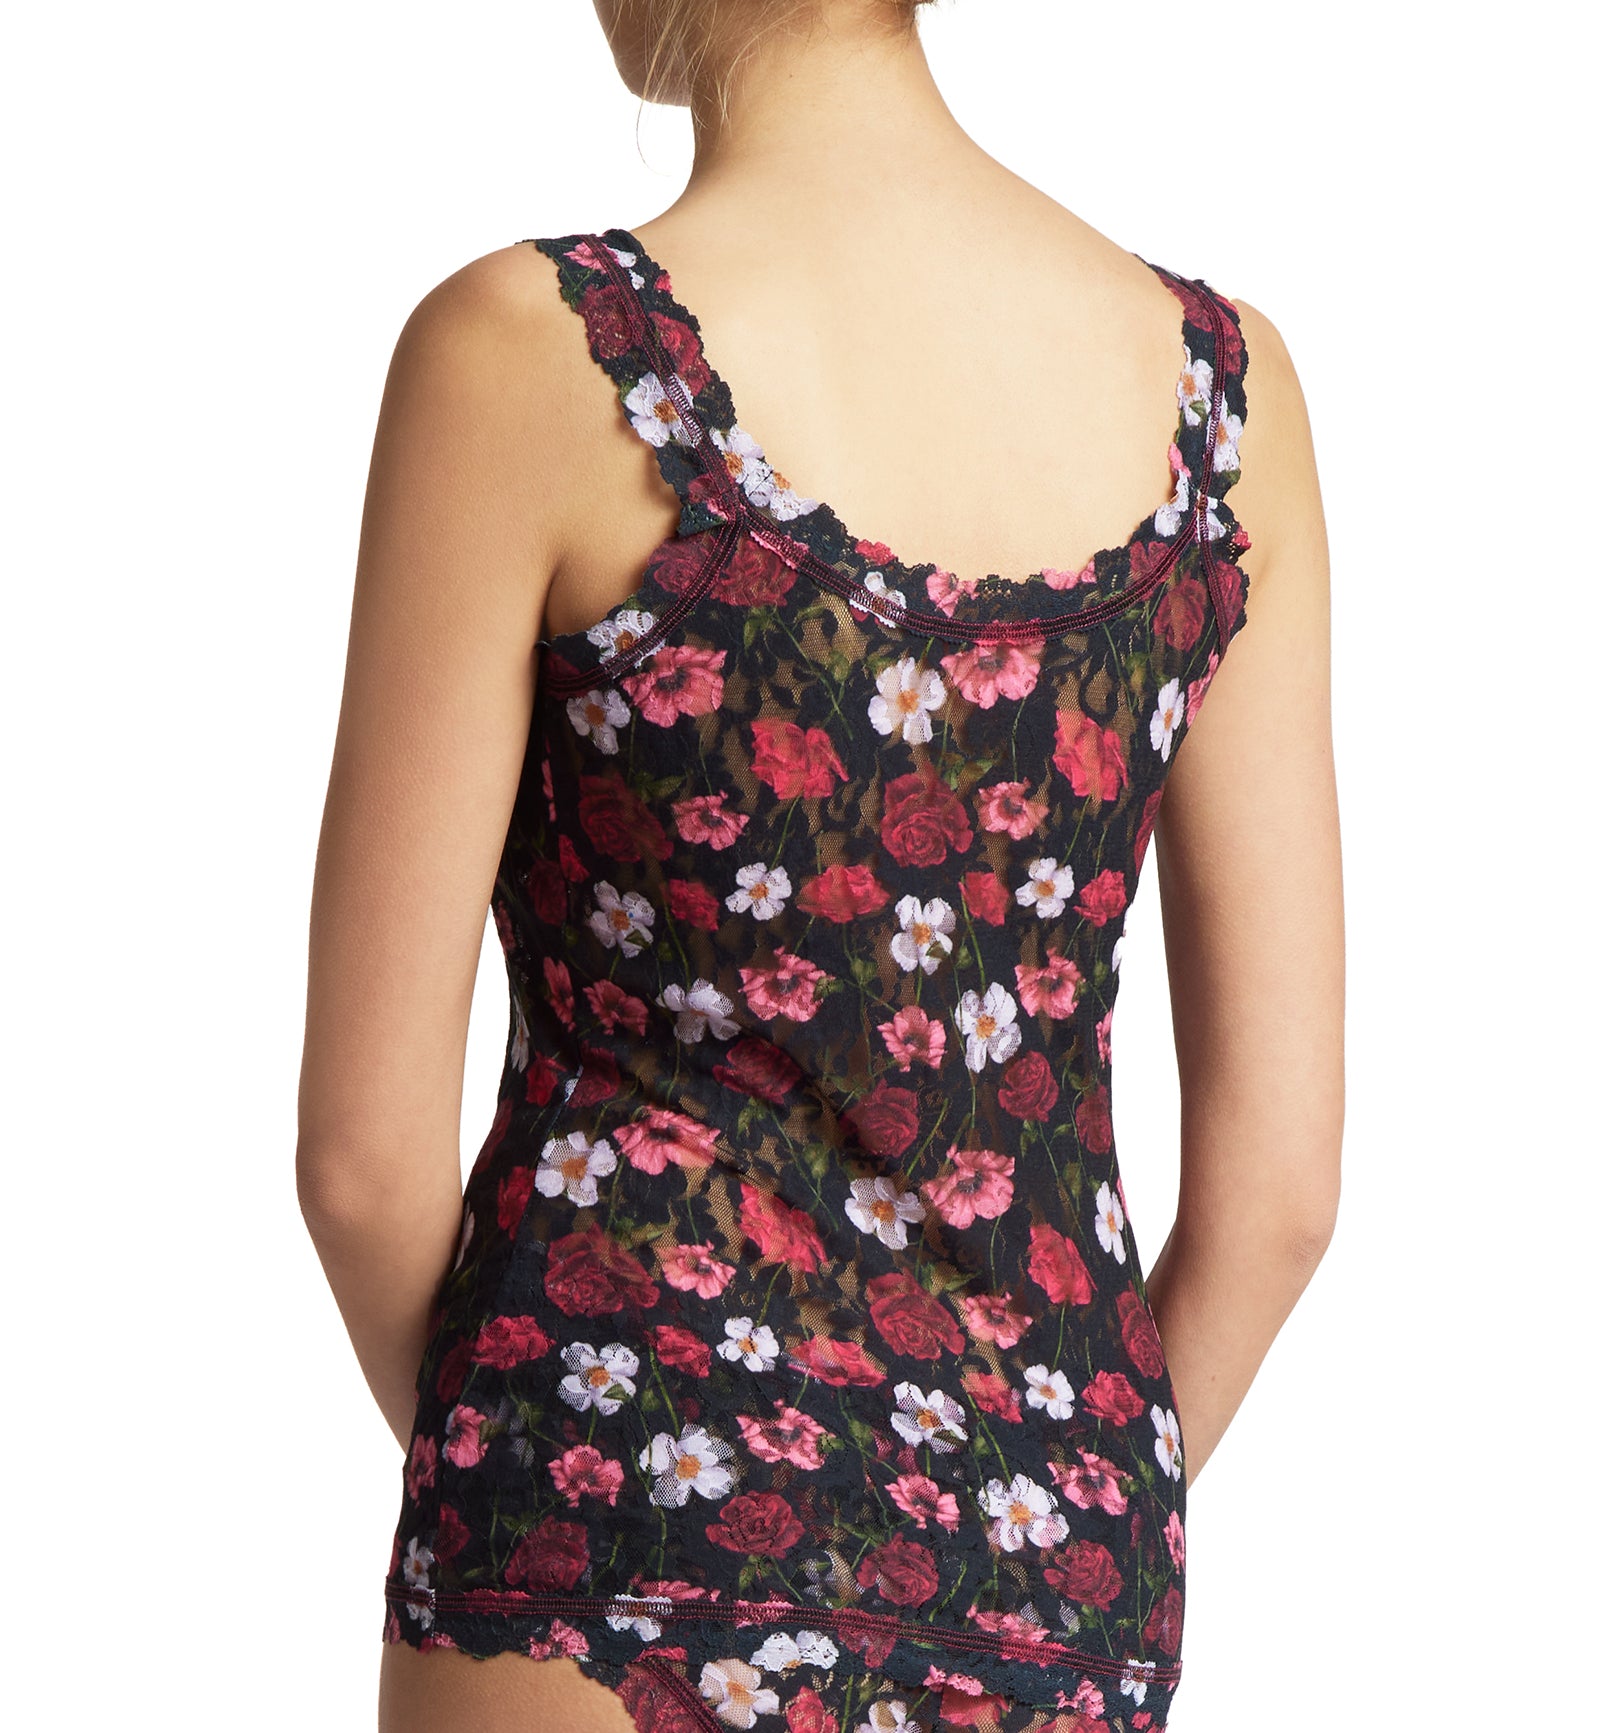 Hanky Panky Signature Lace Printed Unlined Camisole (PR1390L),XS,Am I Dreaming - Am I Dreaming,XS